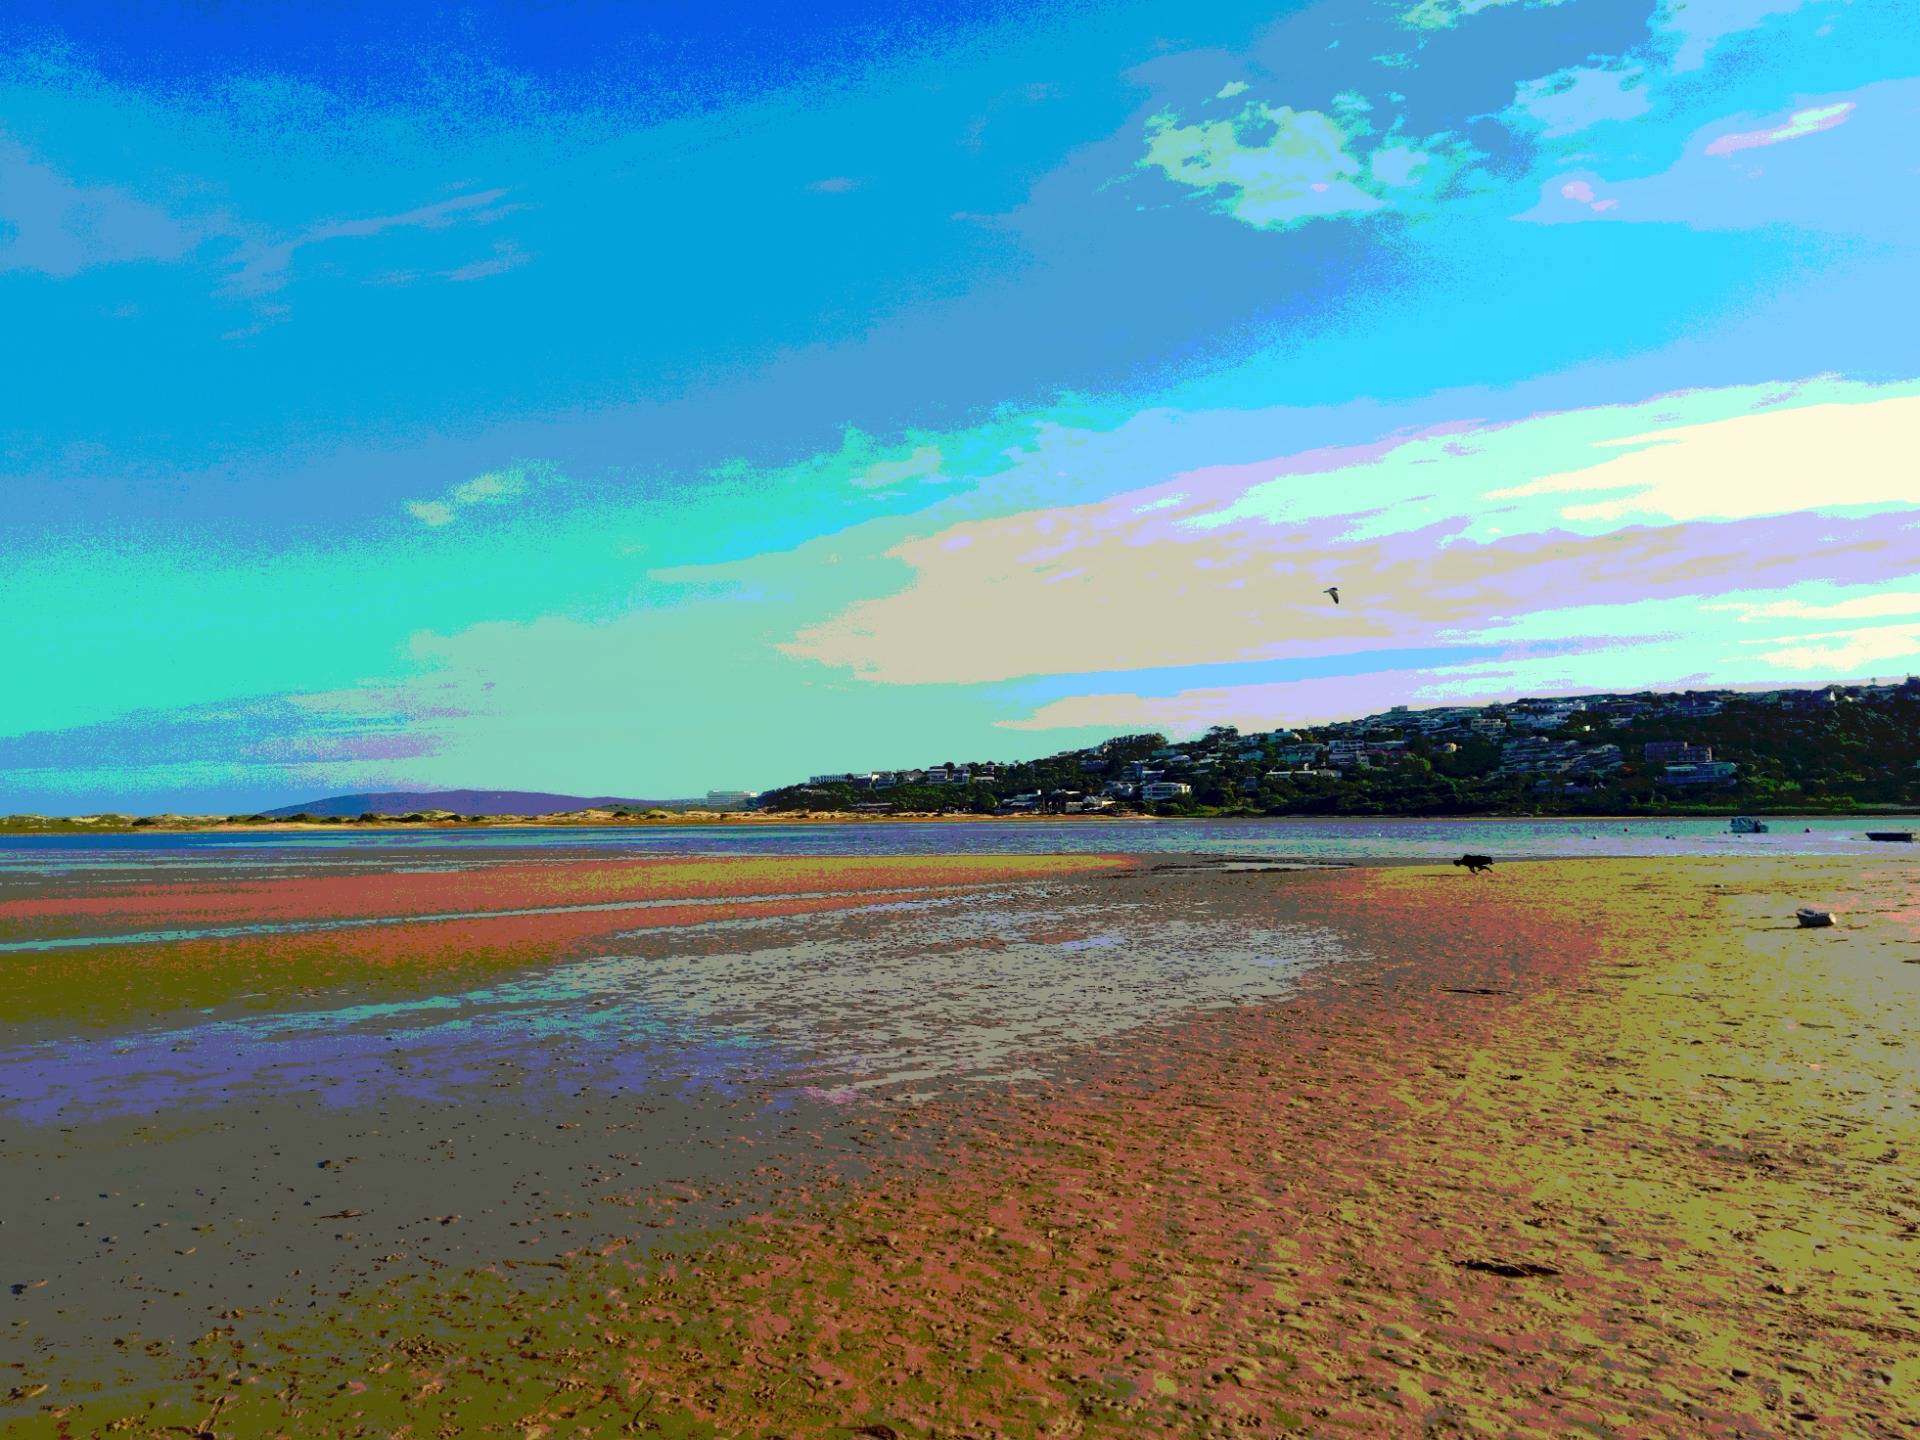 Impressionist rendition of the spring seascape at plett lagoon